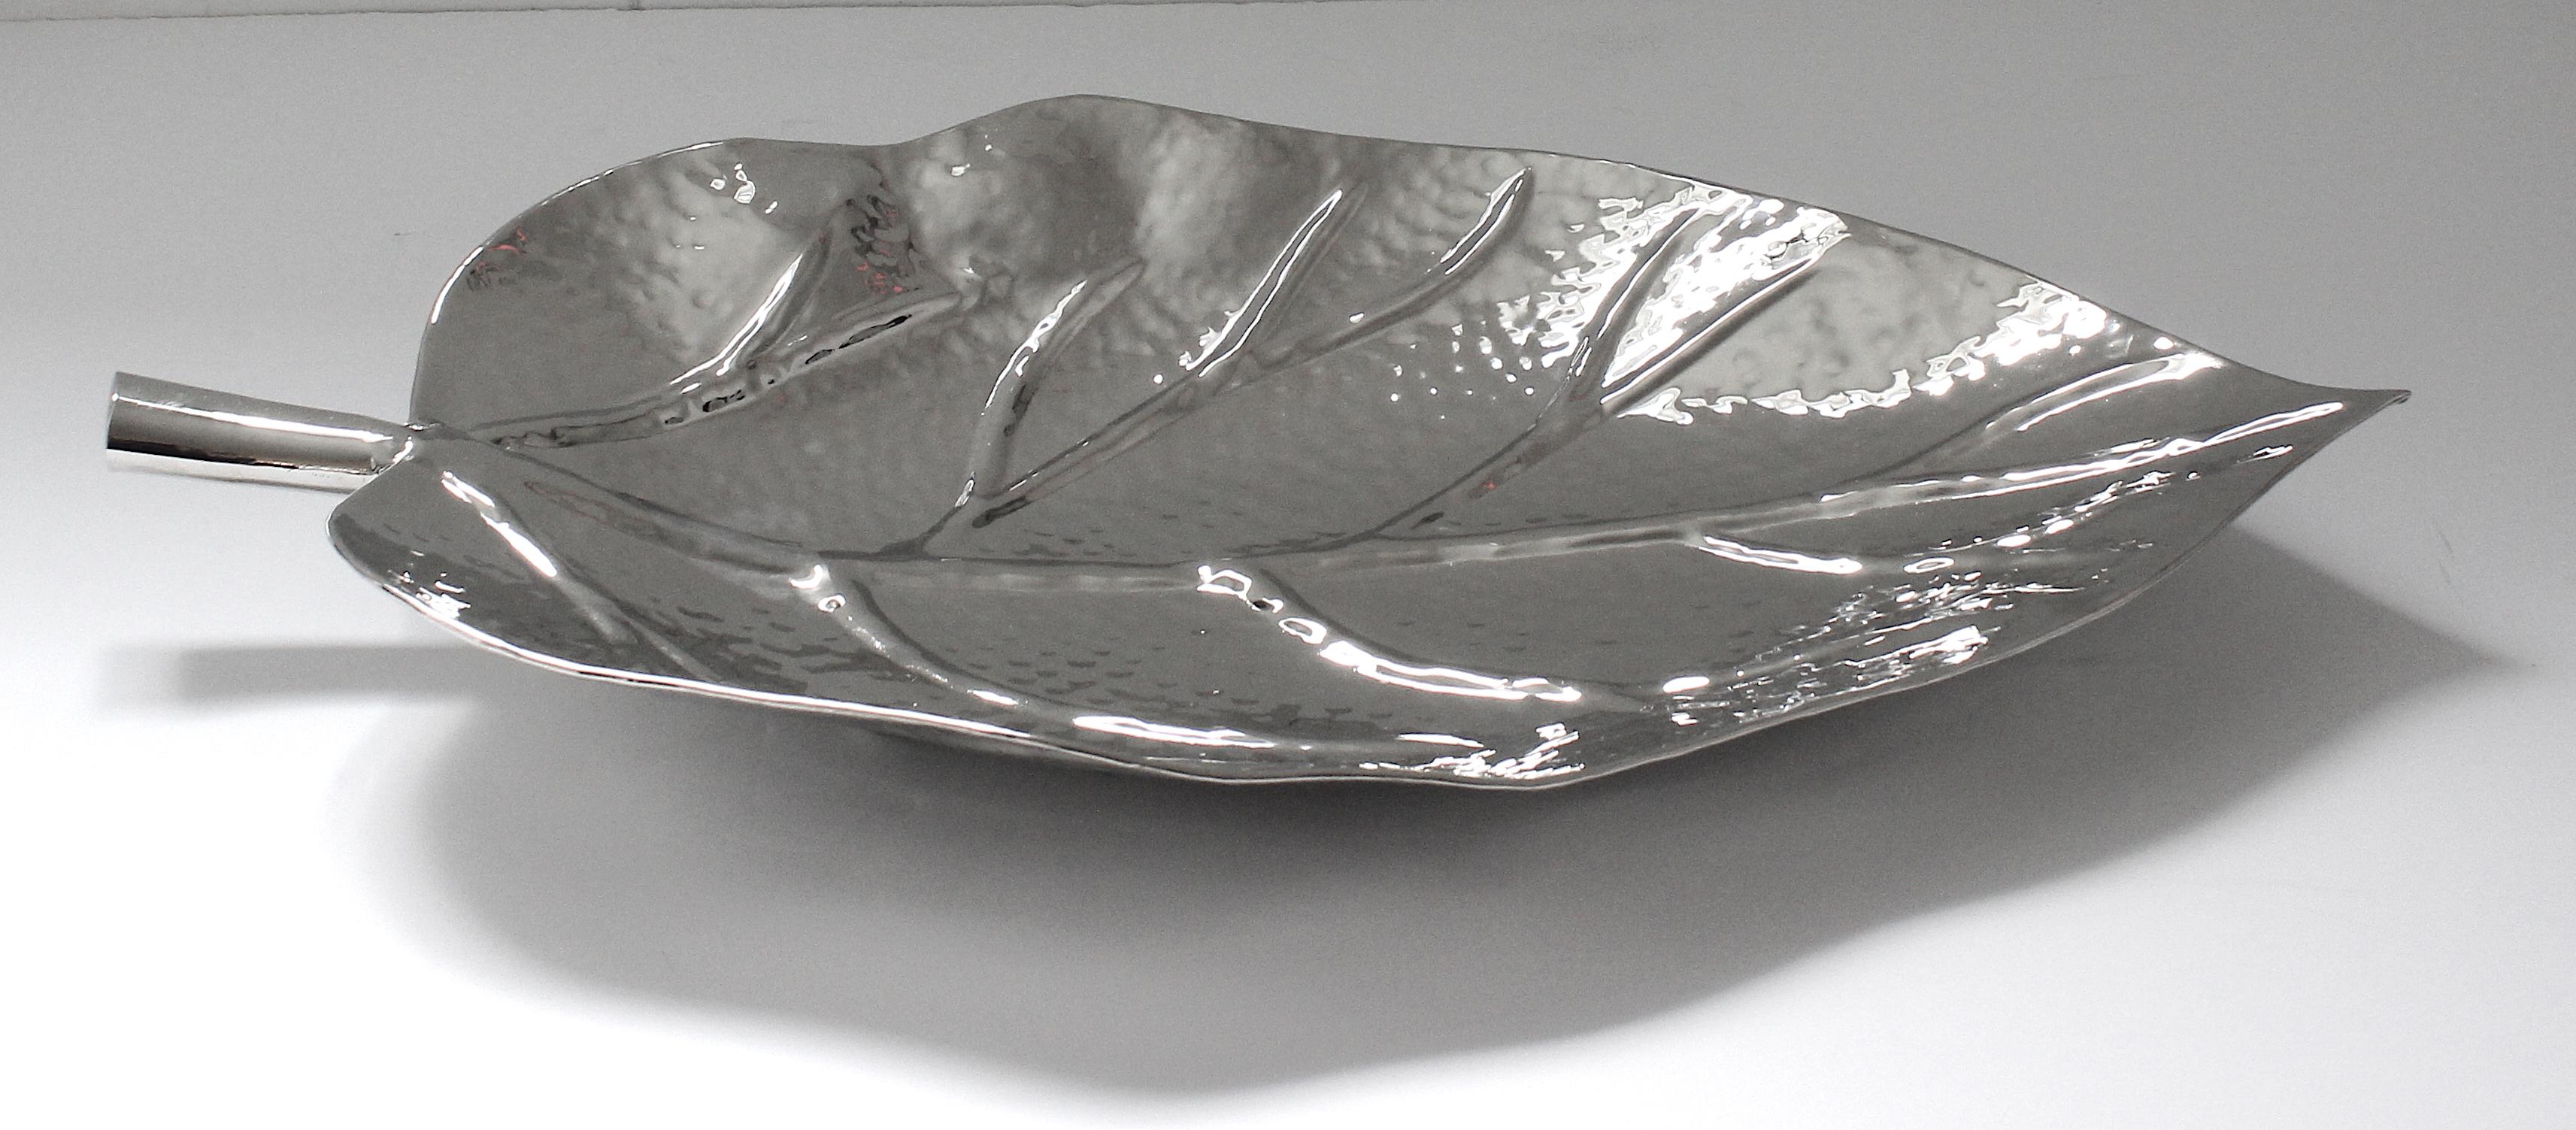 This stylish and chic nickel plated serving dish in the form of a leaf was created by Iconic Snob Galeries, and it will make a subtle statement with its form and finish.